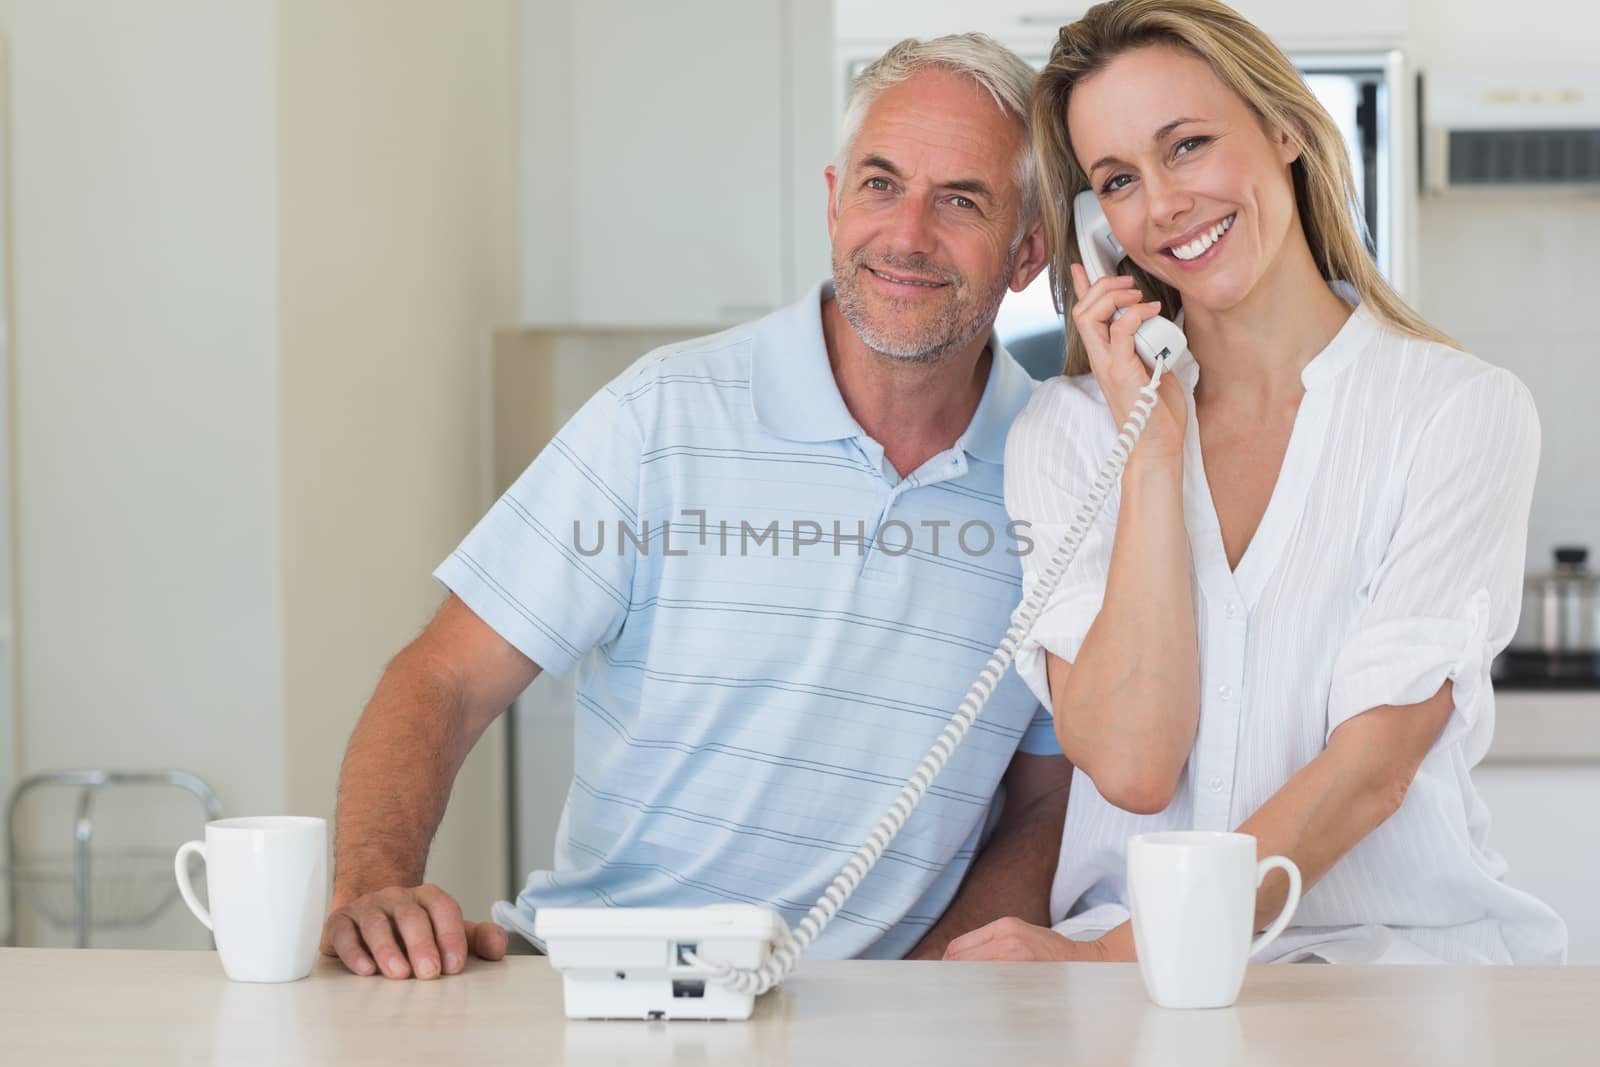 Smiling man listening in on his blonde partners phone call by Wavebreakmedia